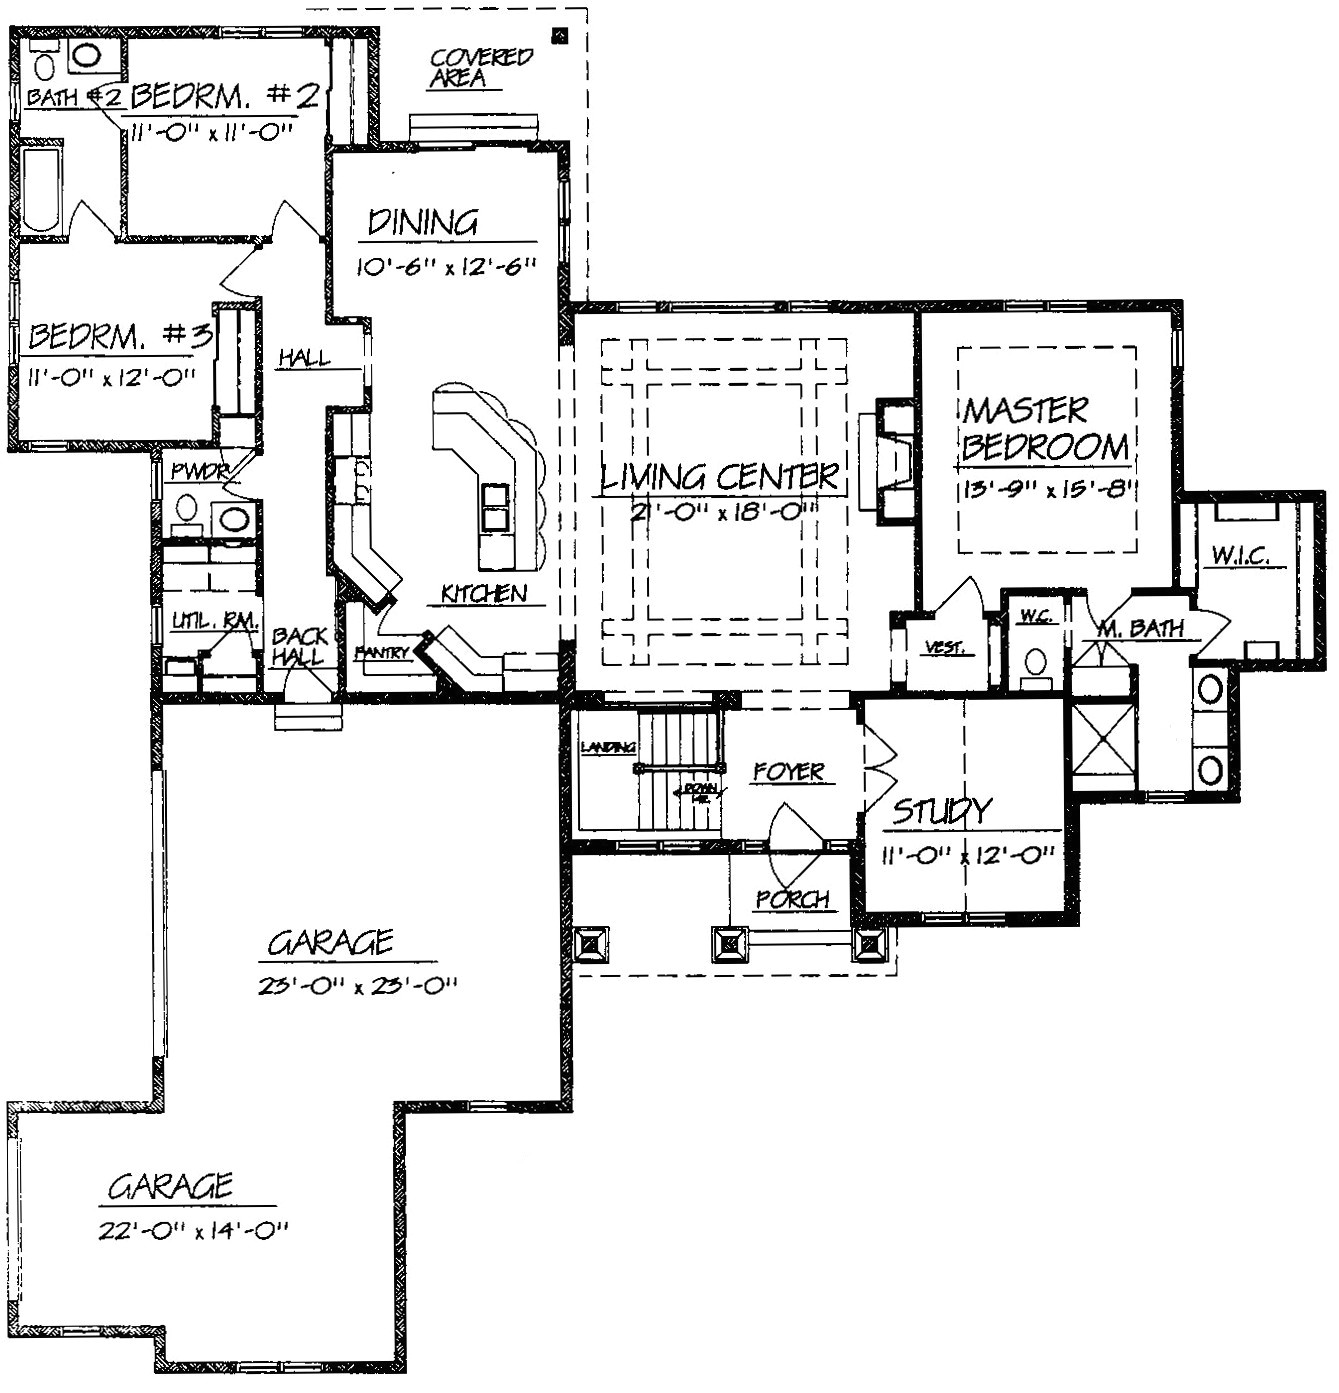 open floor plans for ranch homes beautiful best open floor plans for ranch style homes home xmas